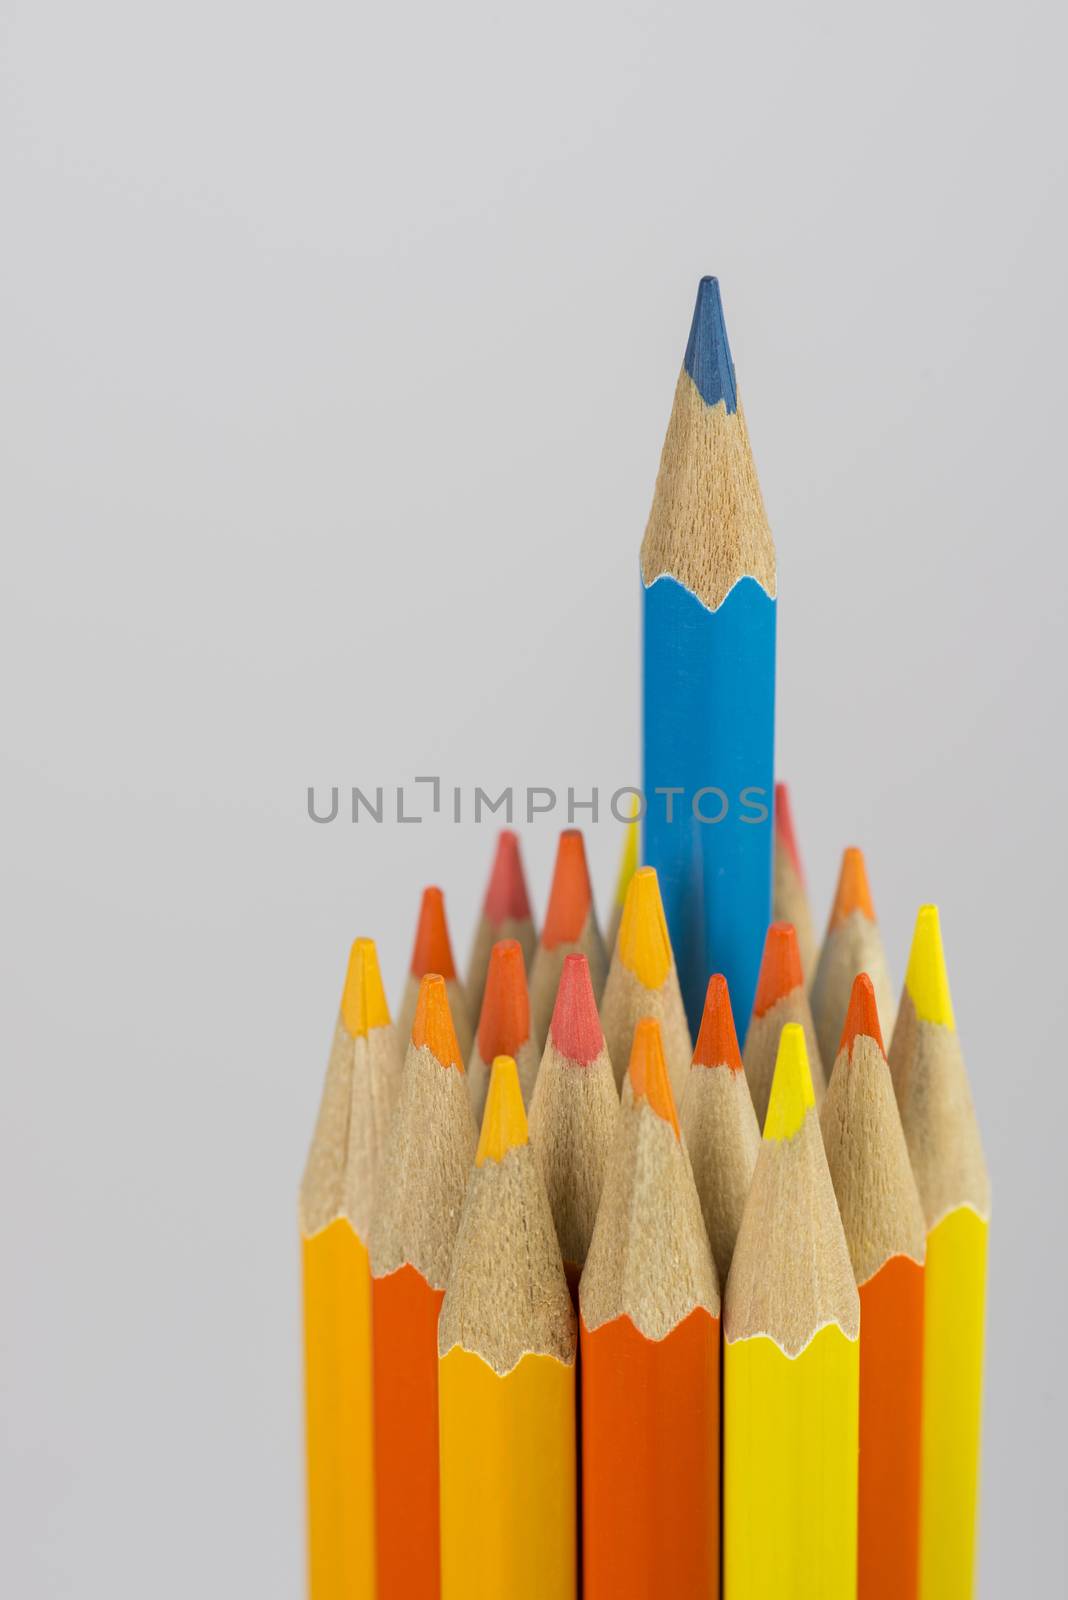 Abstract composition of a set wooden colour pencils against a white background
